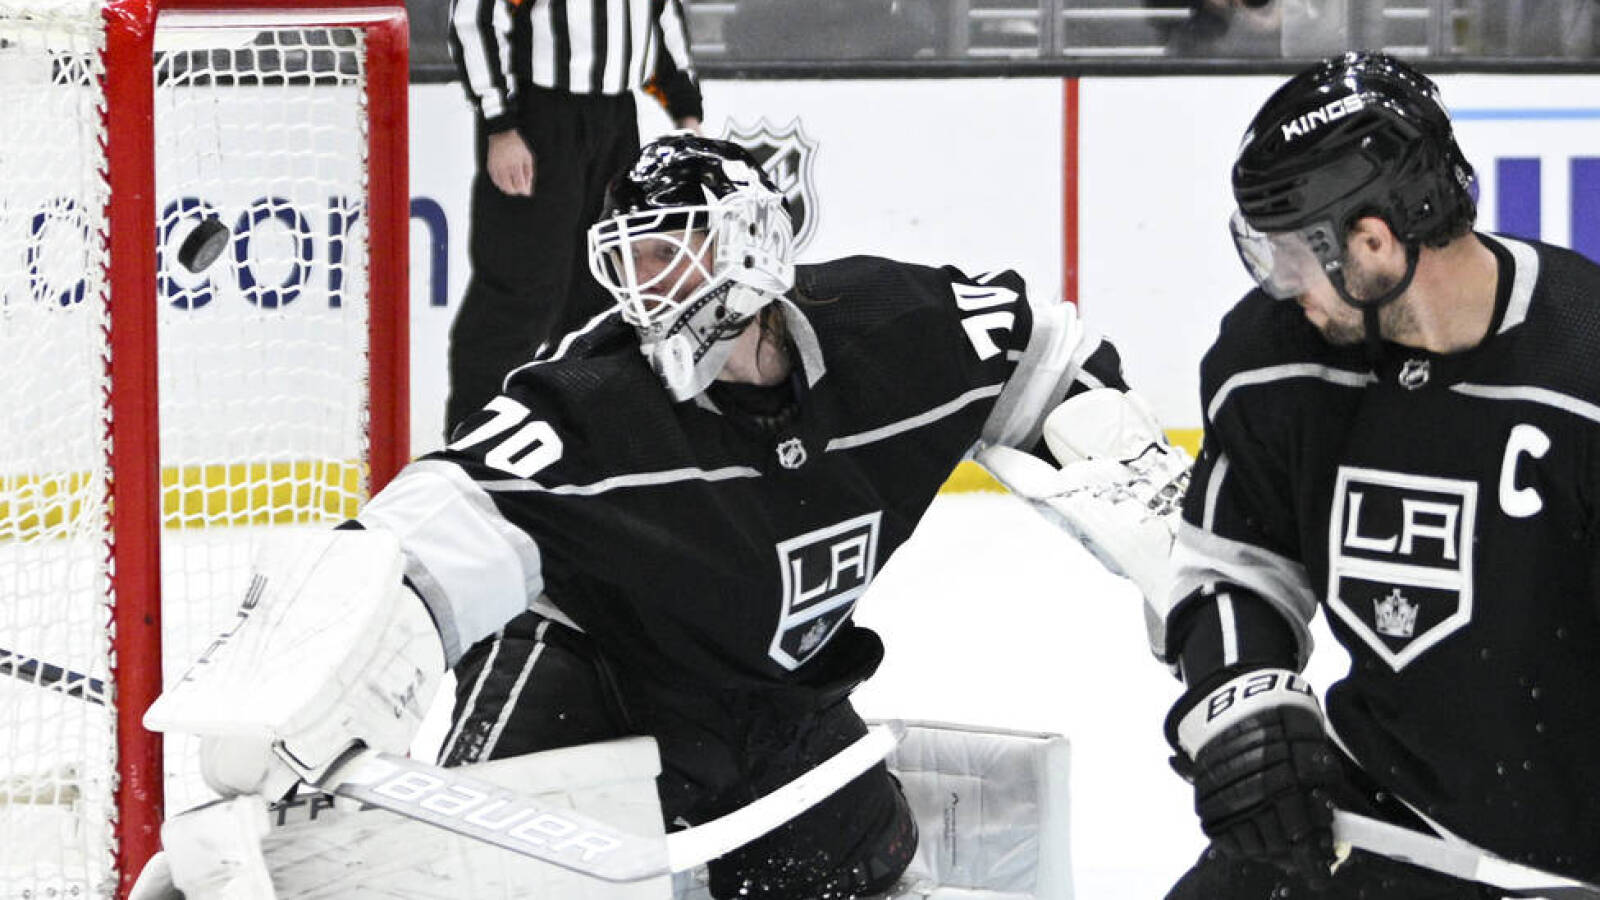 Joonas Korpisalo of the Los Angeles Kings protects the goal during